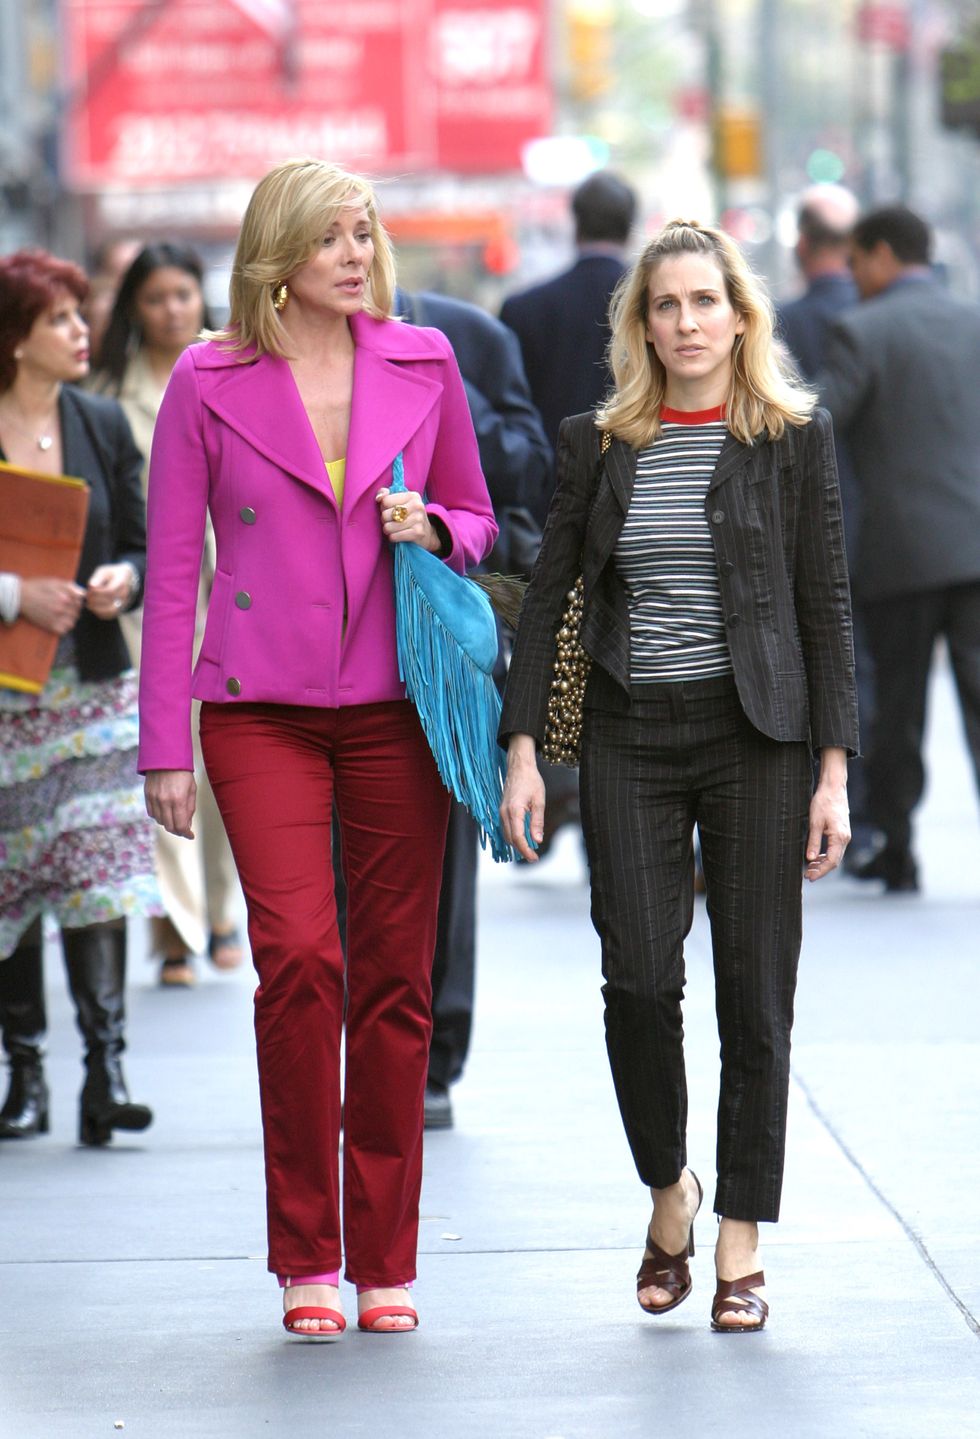 Samantha Jones and Carrie Bradshaw Sex and the City outfits